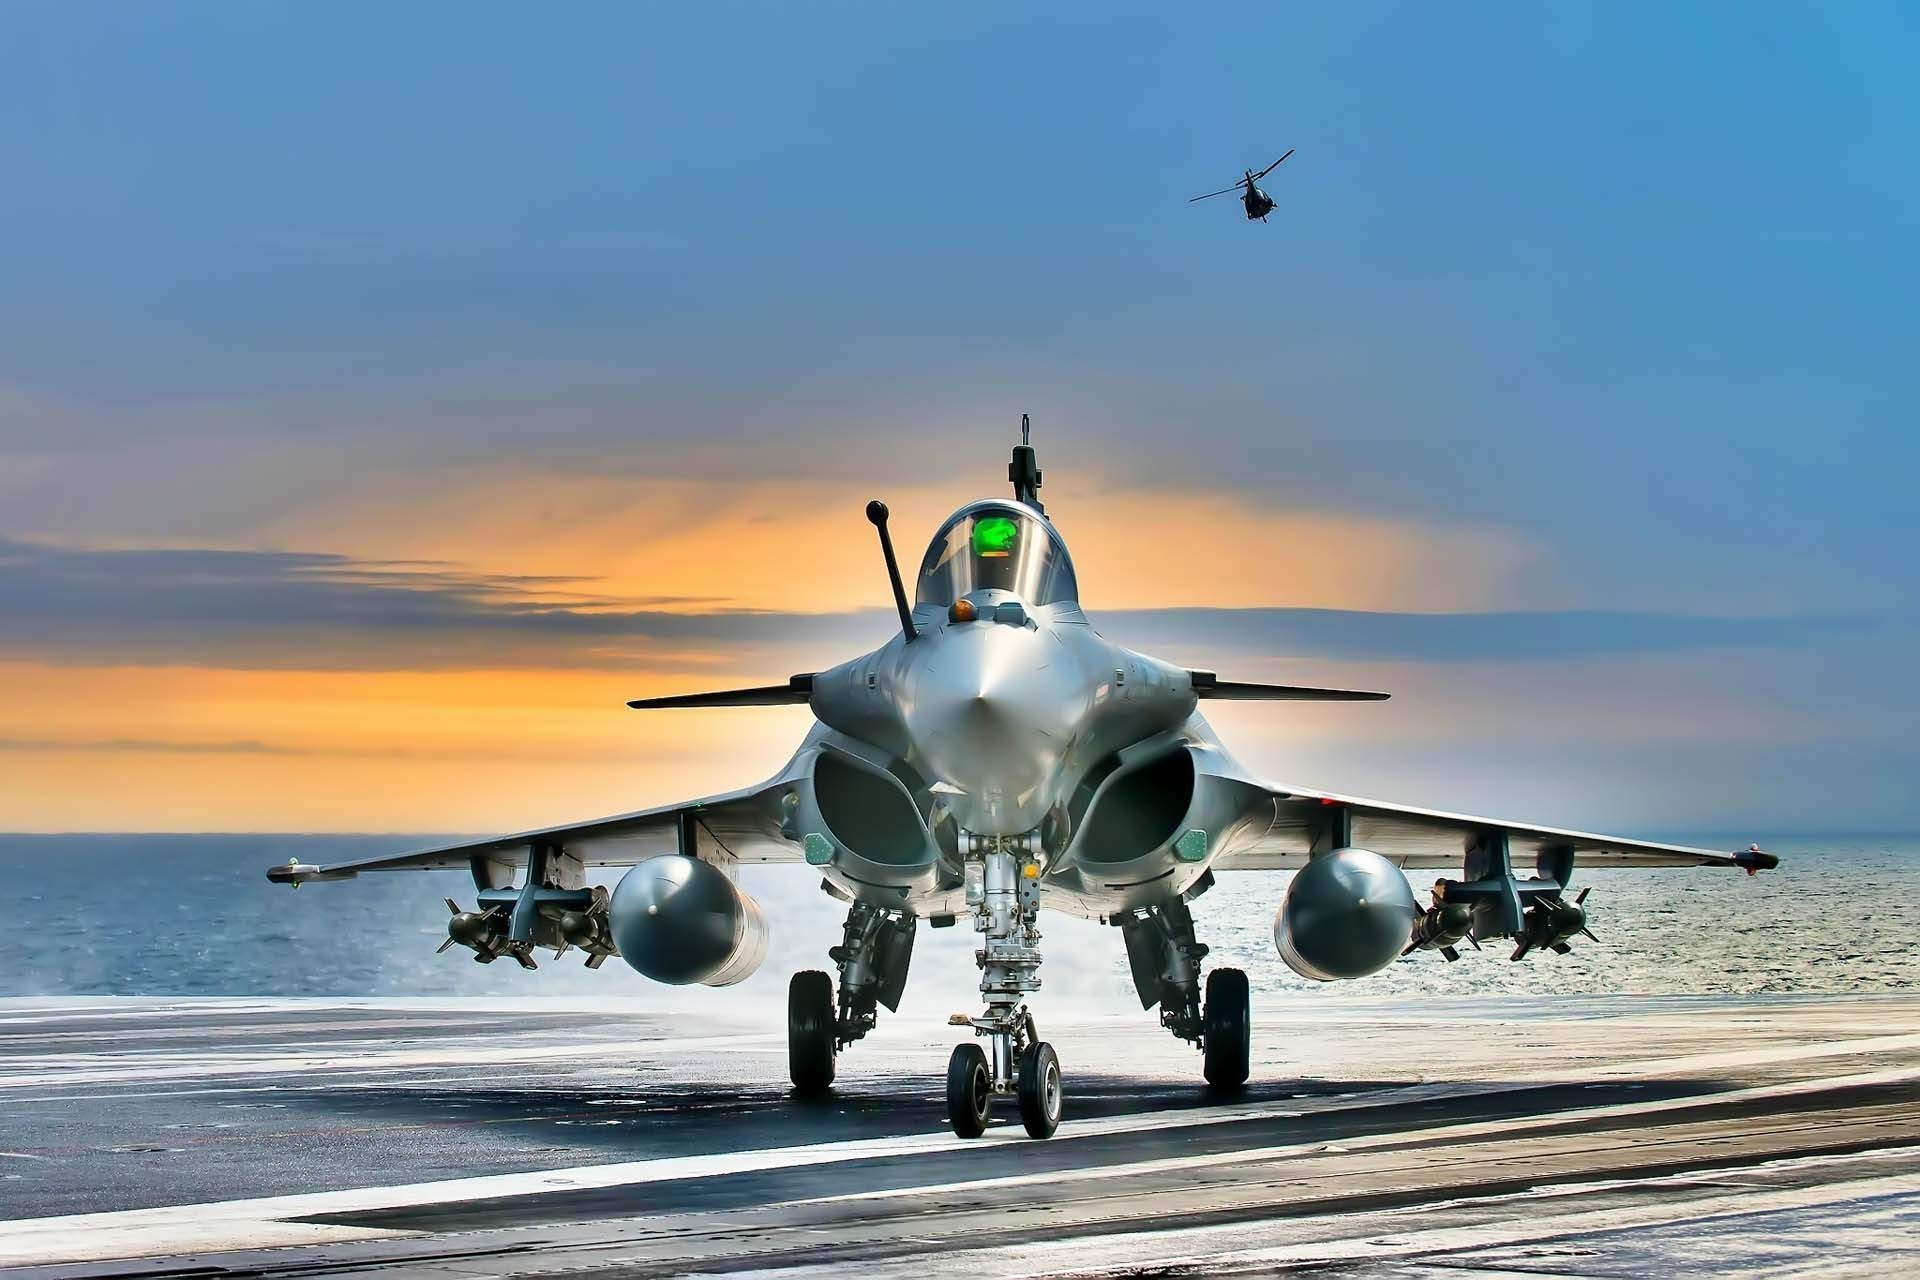 Rafale The Sexiest Fighter Aircraft Today On The Deck Of Aircraft Carrier With Sunset On The Background 1920x1280